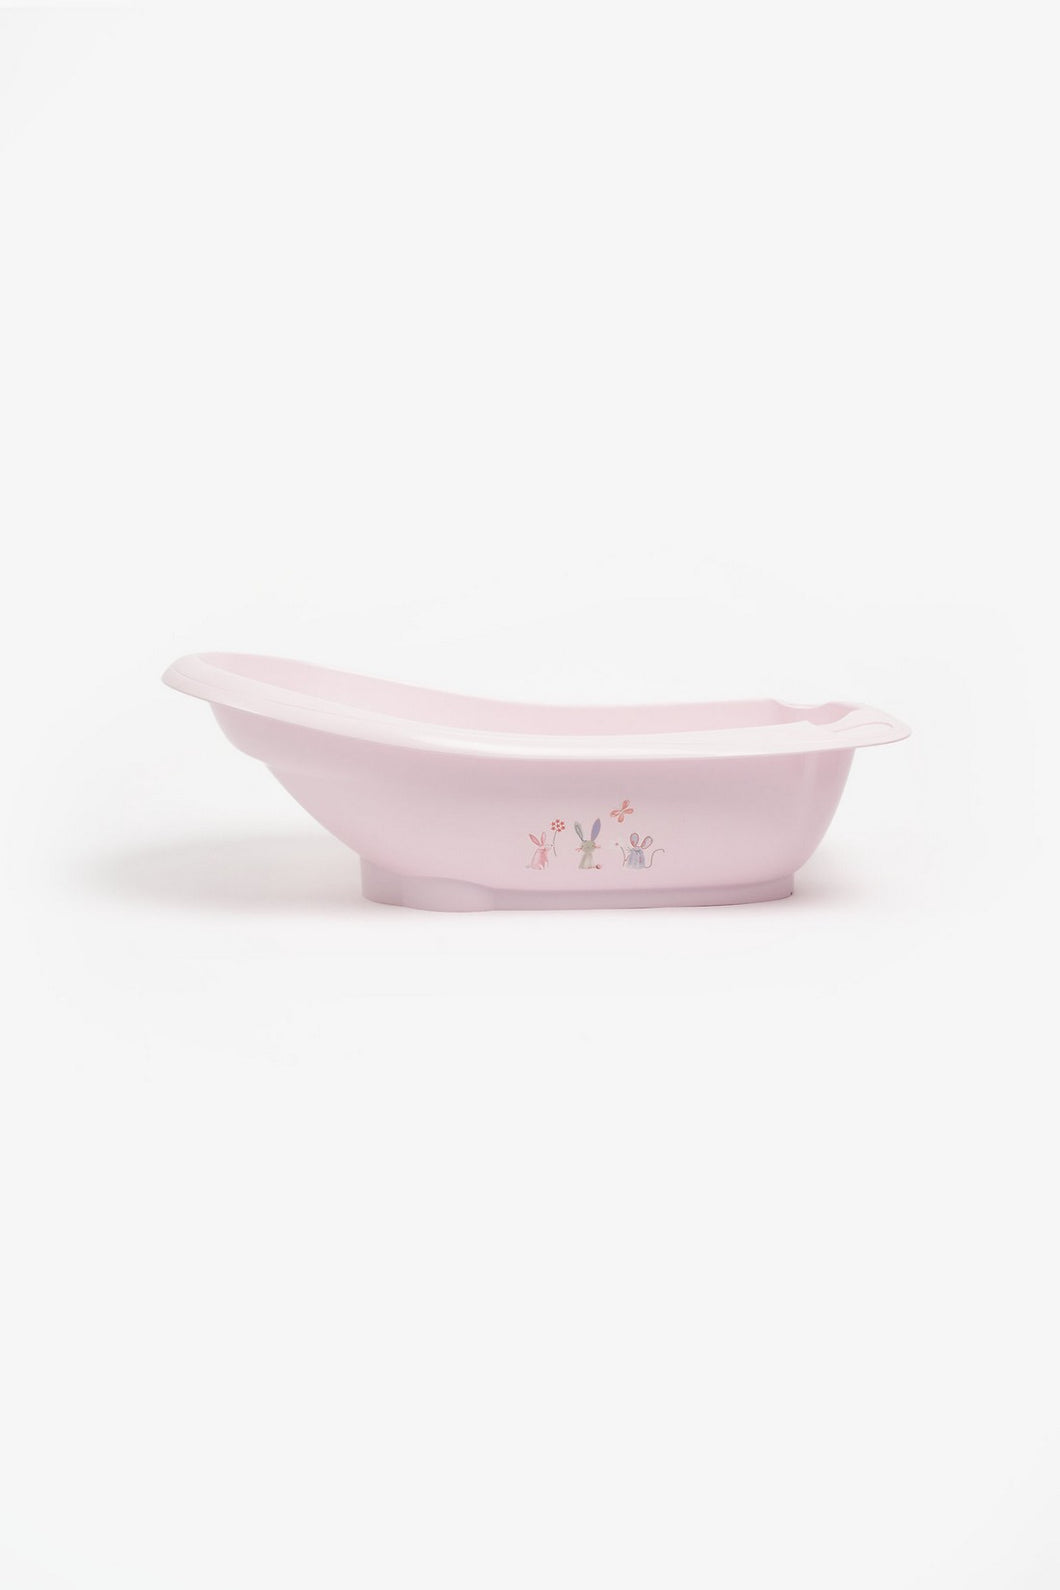 Mothercare Flutterby Baby Bath 1